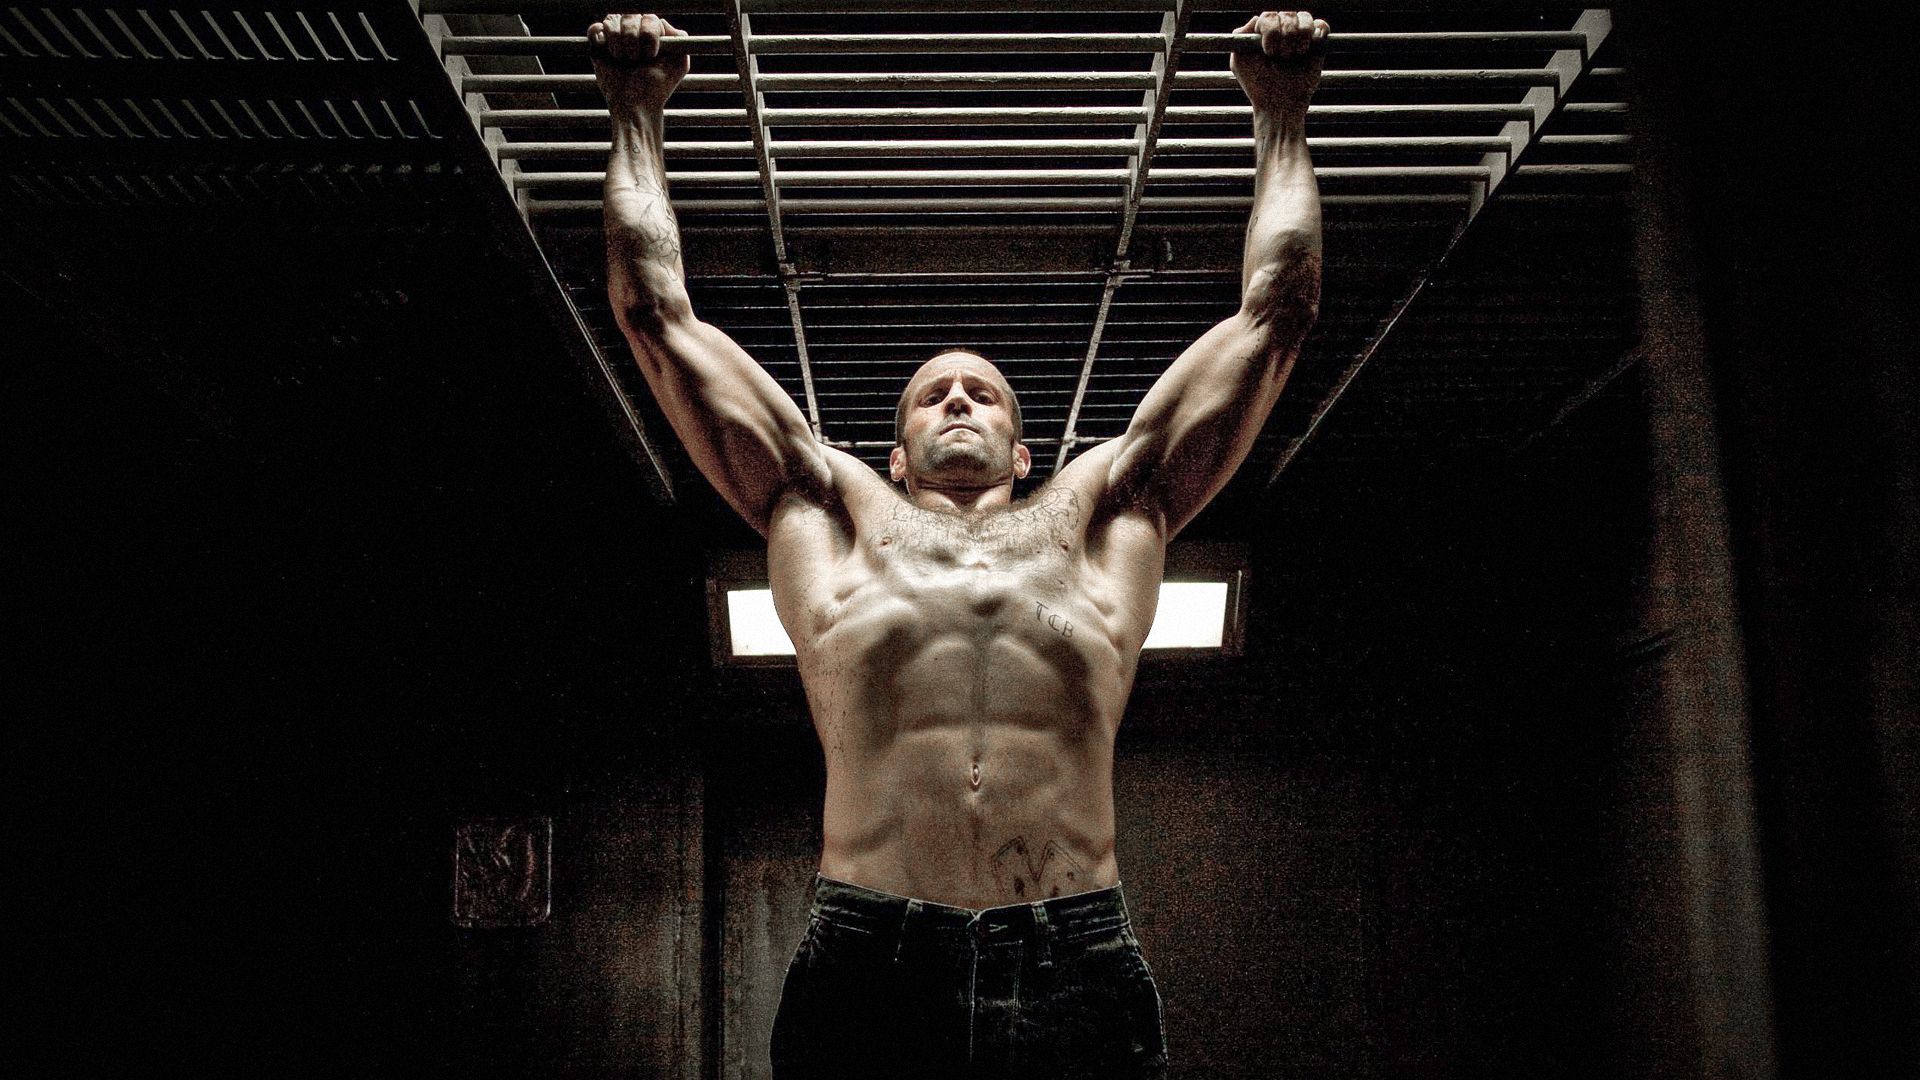 The Six Day Plan That Can Turn You Into A Hollywood Hardman Like Jason Statham